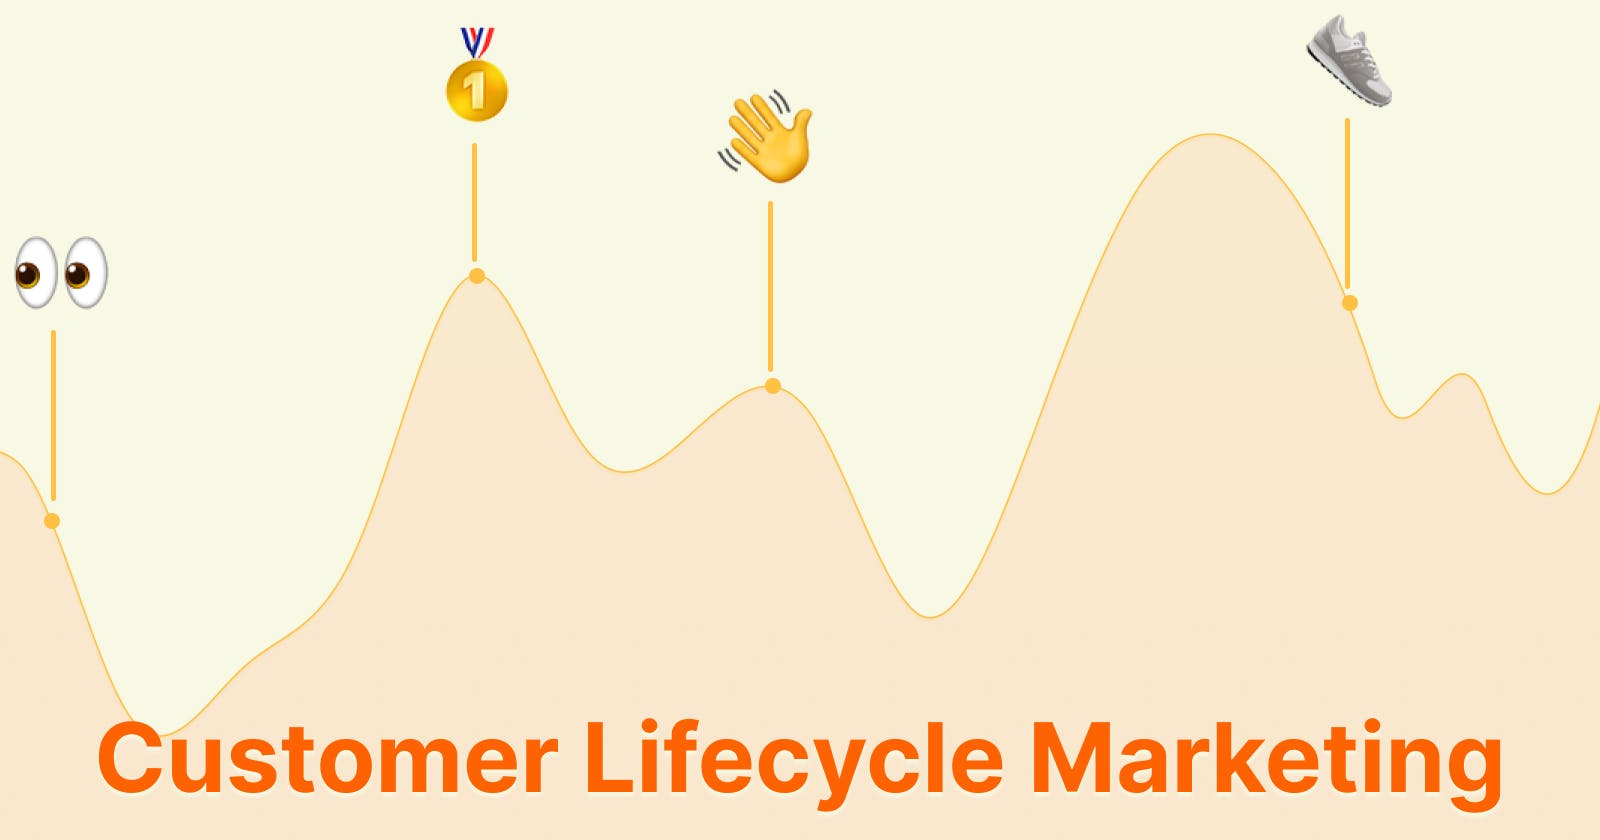 Customer lifecycle marketing and how to do it?